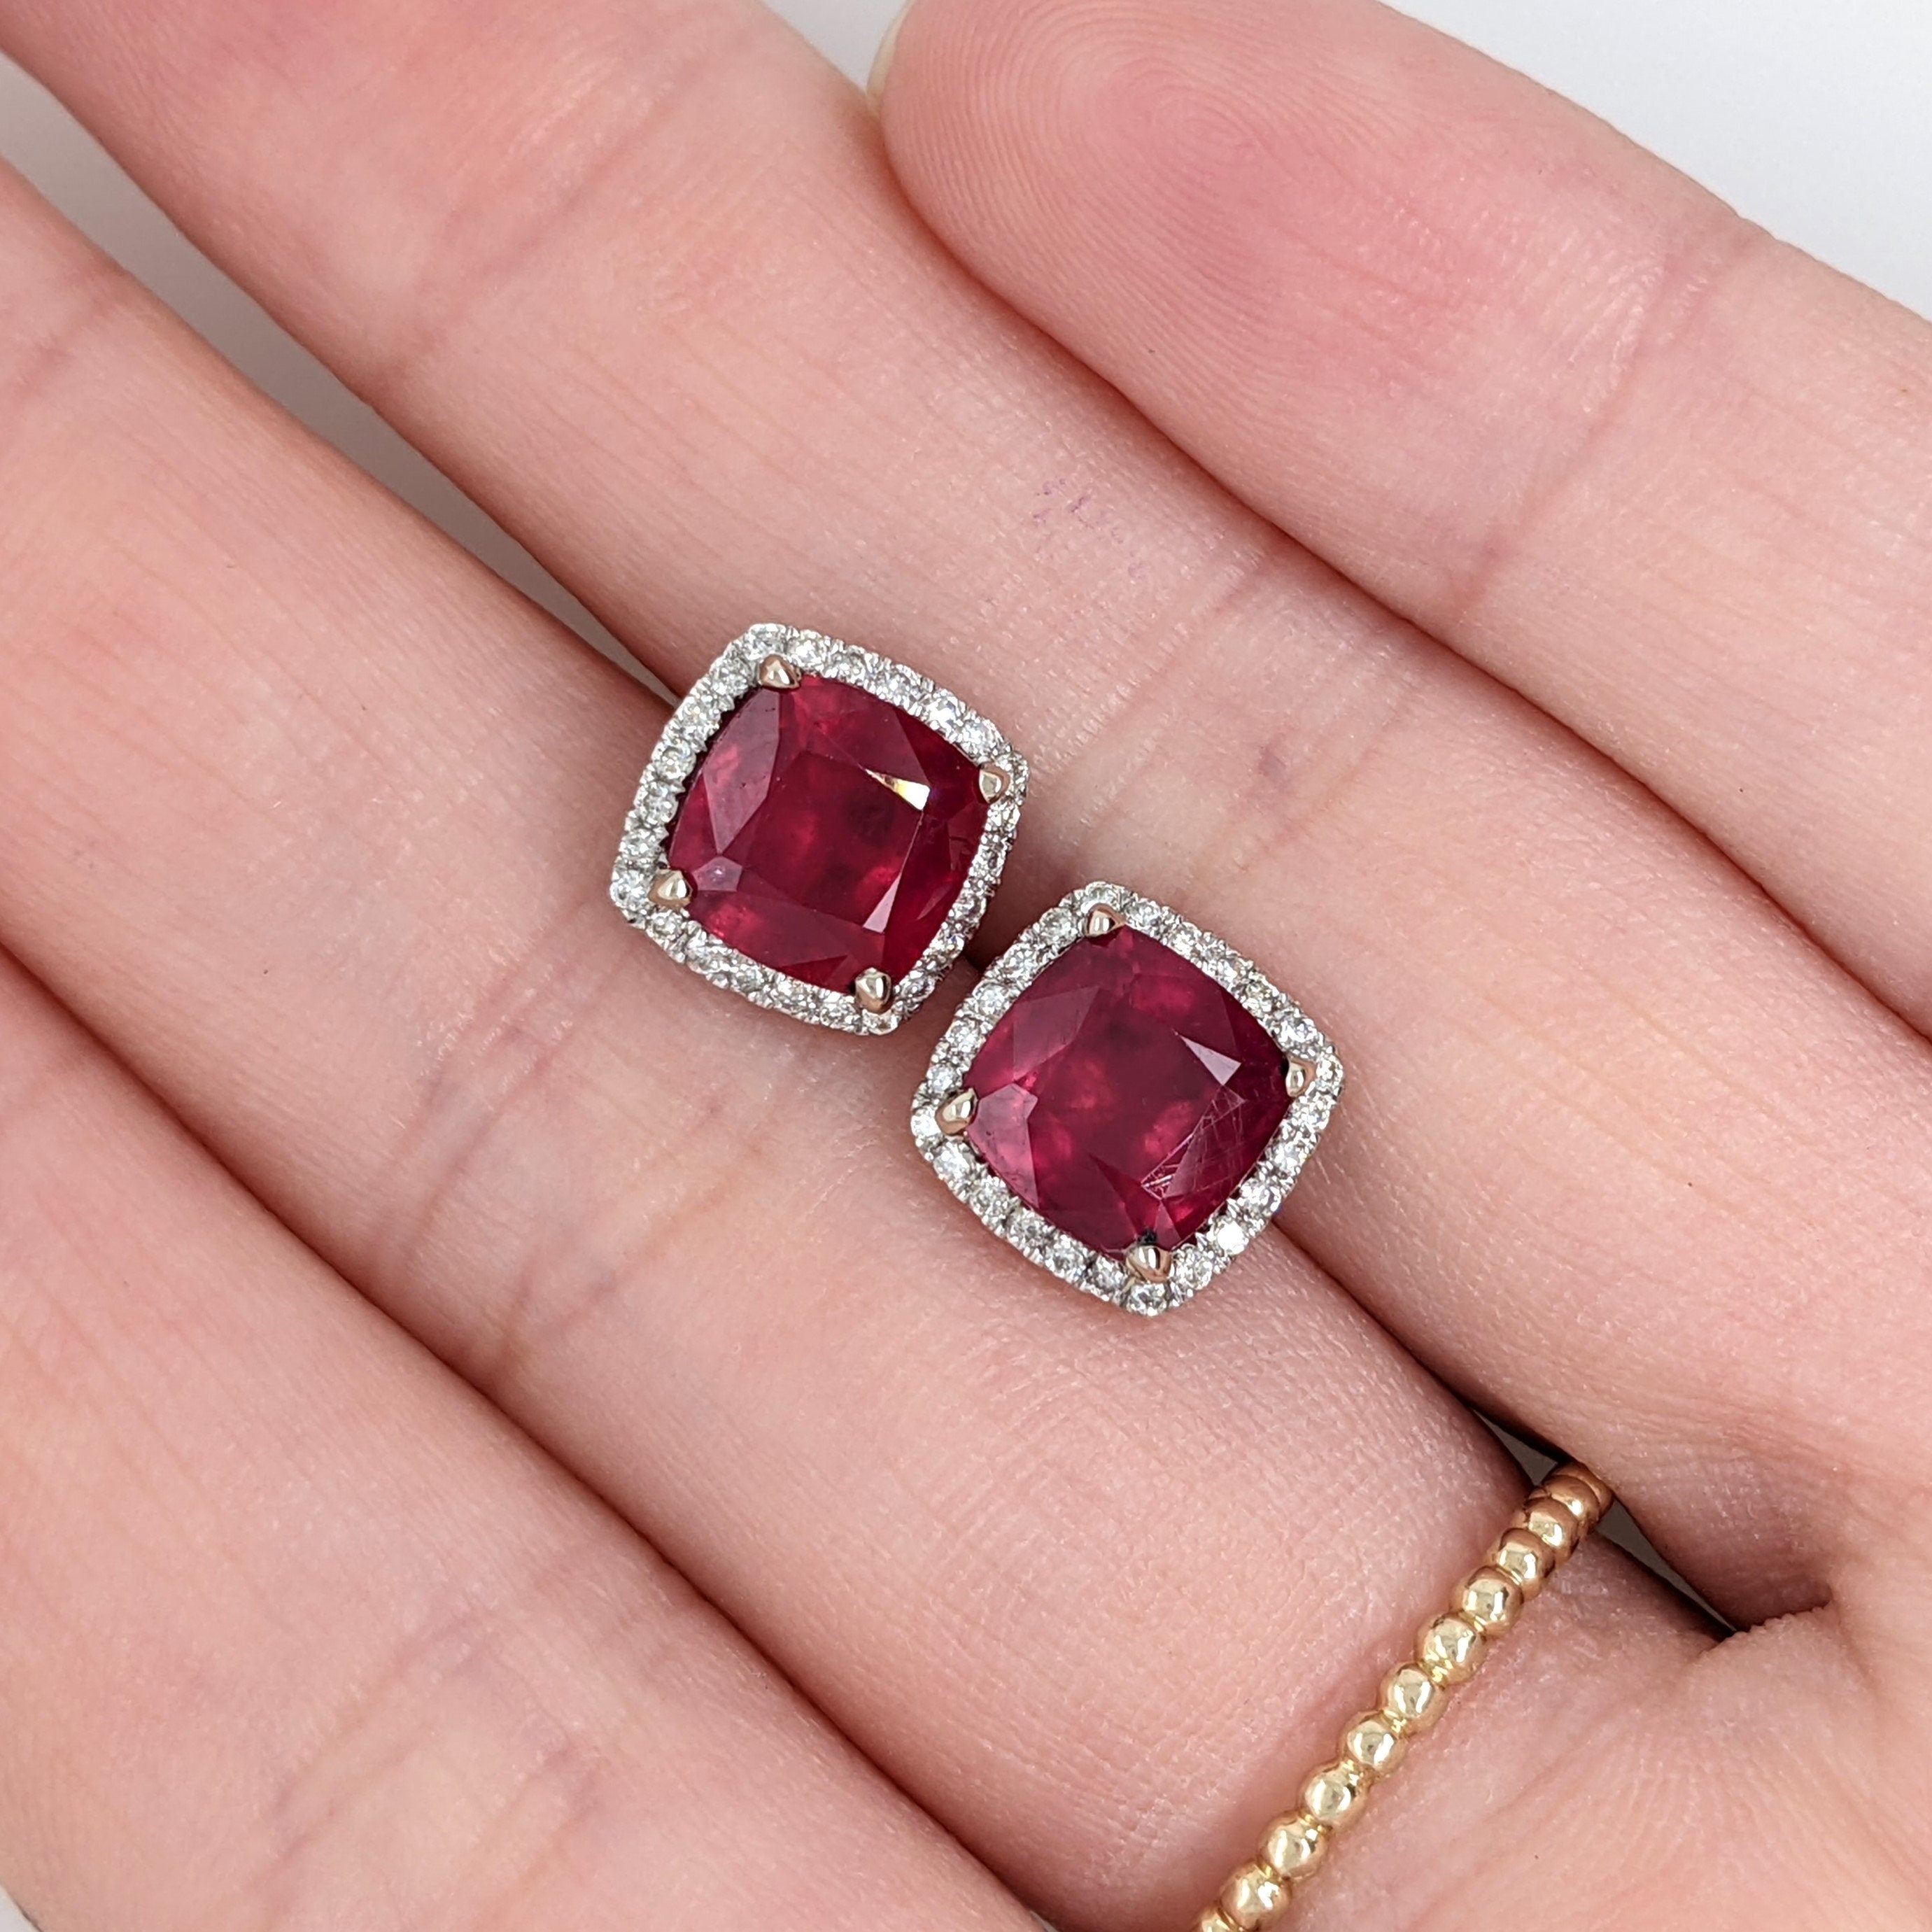 Mozambique Ruby Studs in Solid 14K White Gold with a Natural Diamond Halo | Cushion 7mm | Red Gemstone | Classic | Elegant | July Birthstone